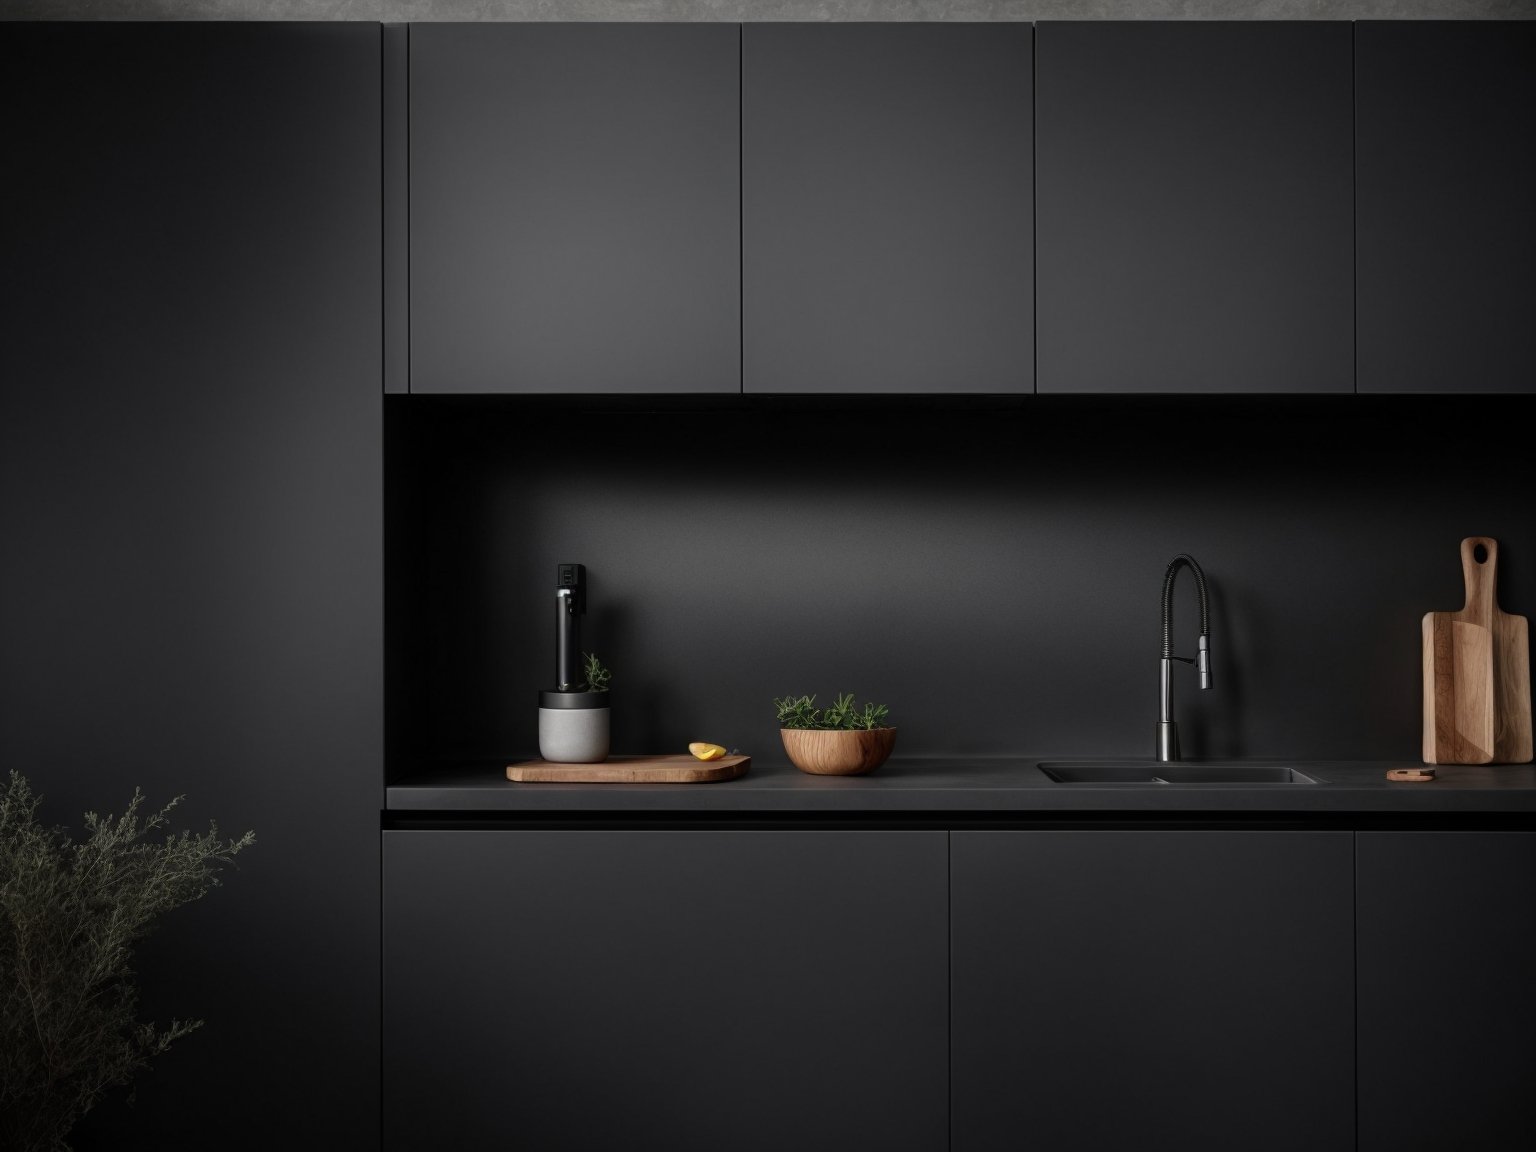 Dark grey kitchen cabinets paired with light grey walls and wood flooring